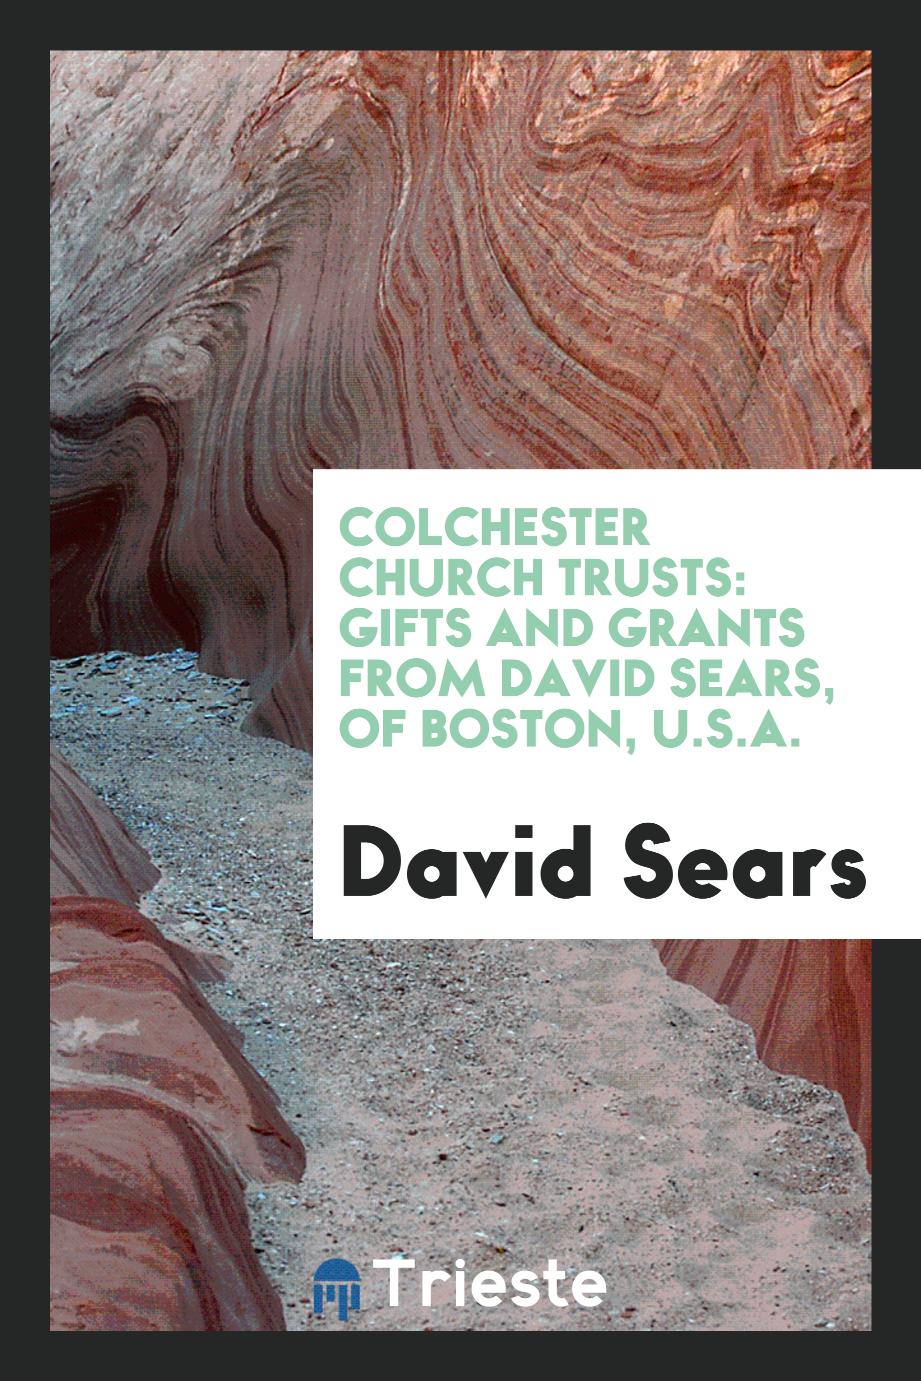 Colchester church trusts: Gifts and grants from David Sears, of Boston, U.S.A.